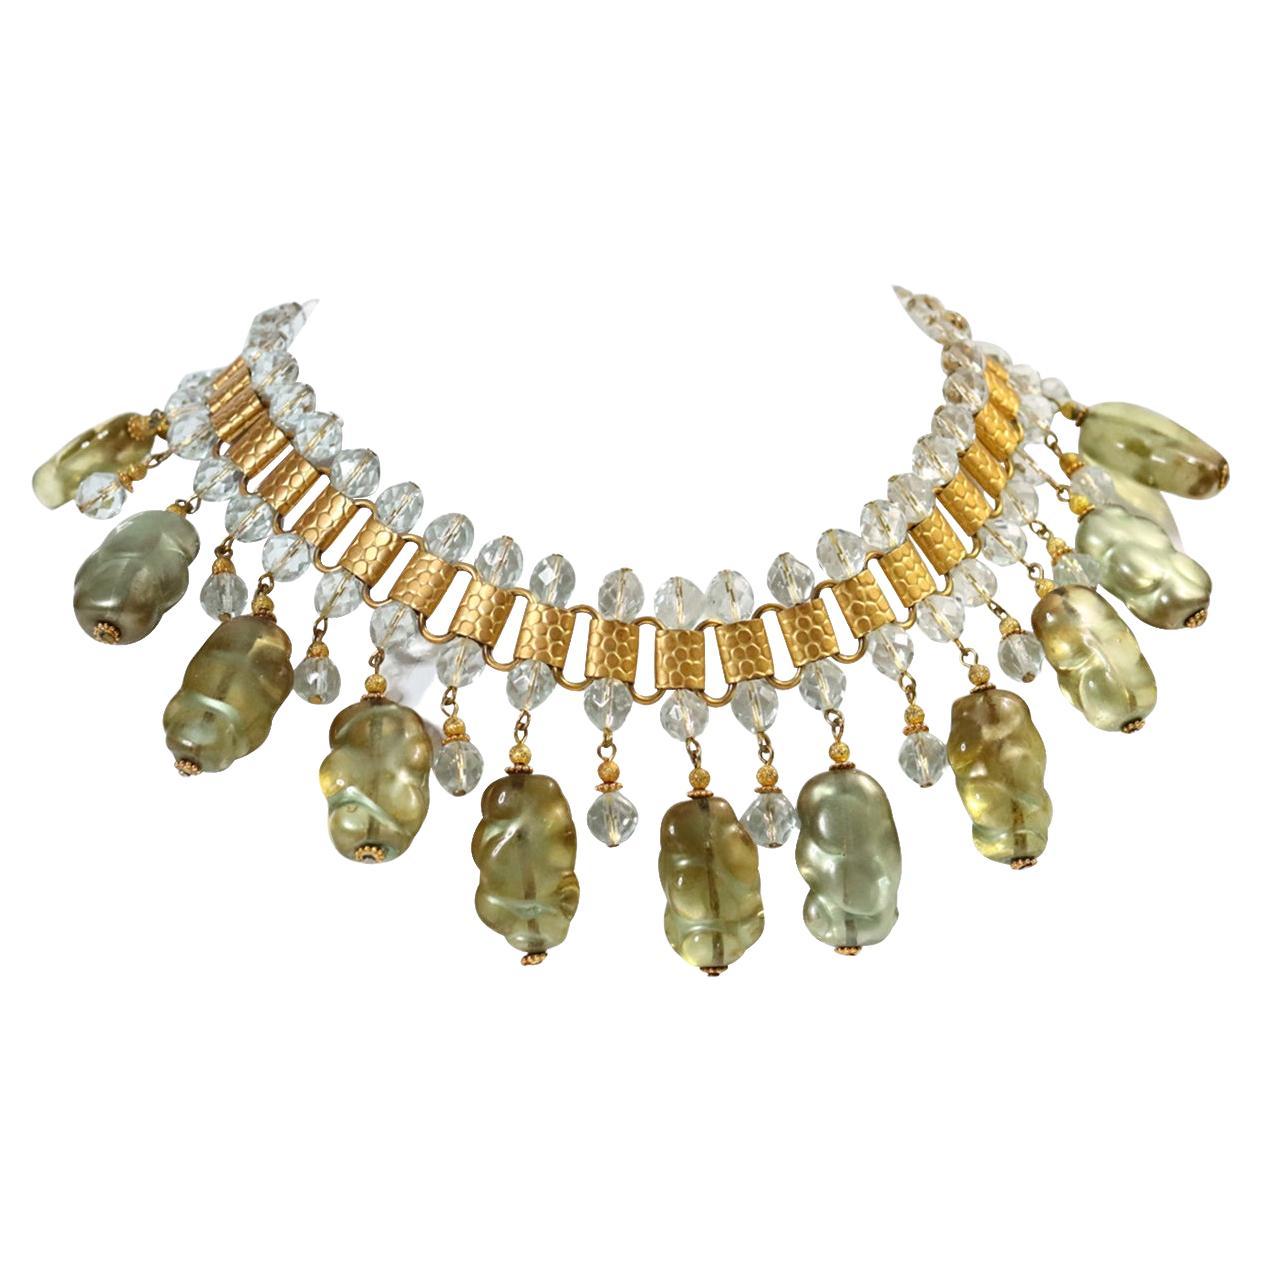 Vintage deLillo Gold Tone with Light Green Dangling Beads Necklace, circa 1970s For Sale 3